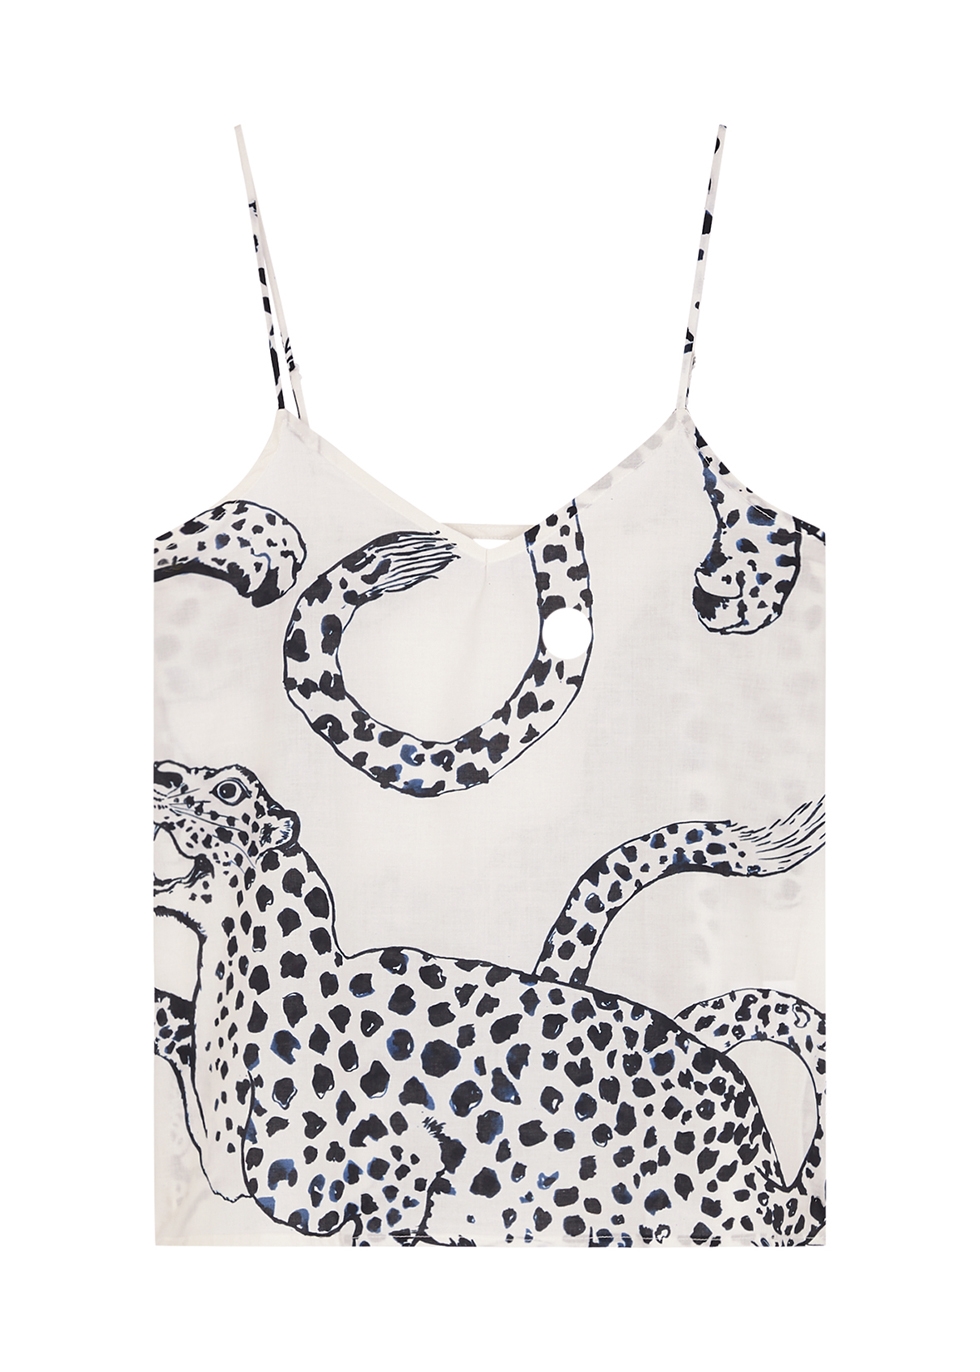 The Jag printed cotton camisole top